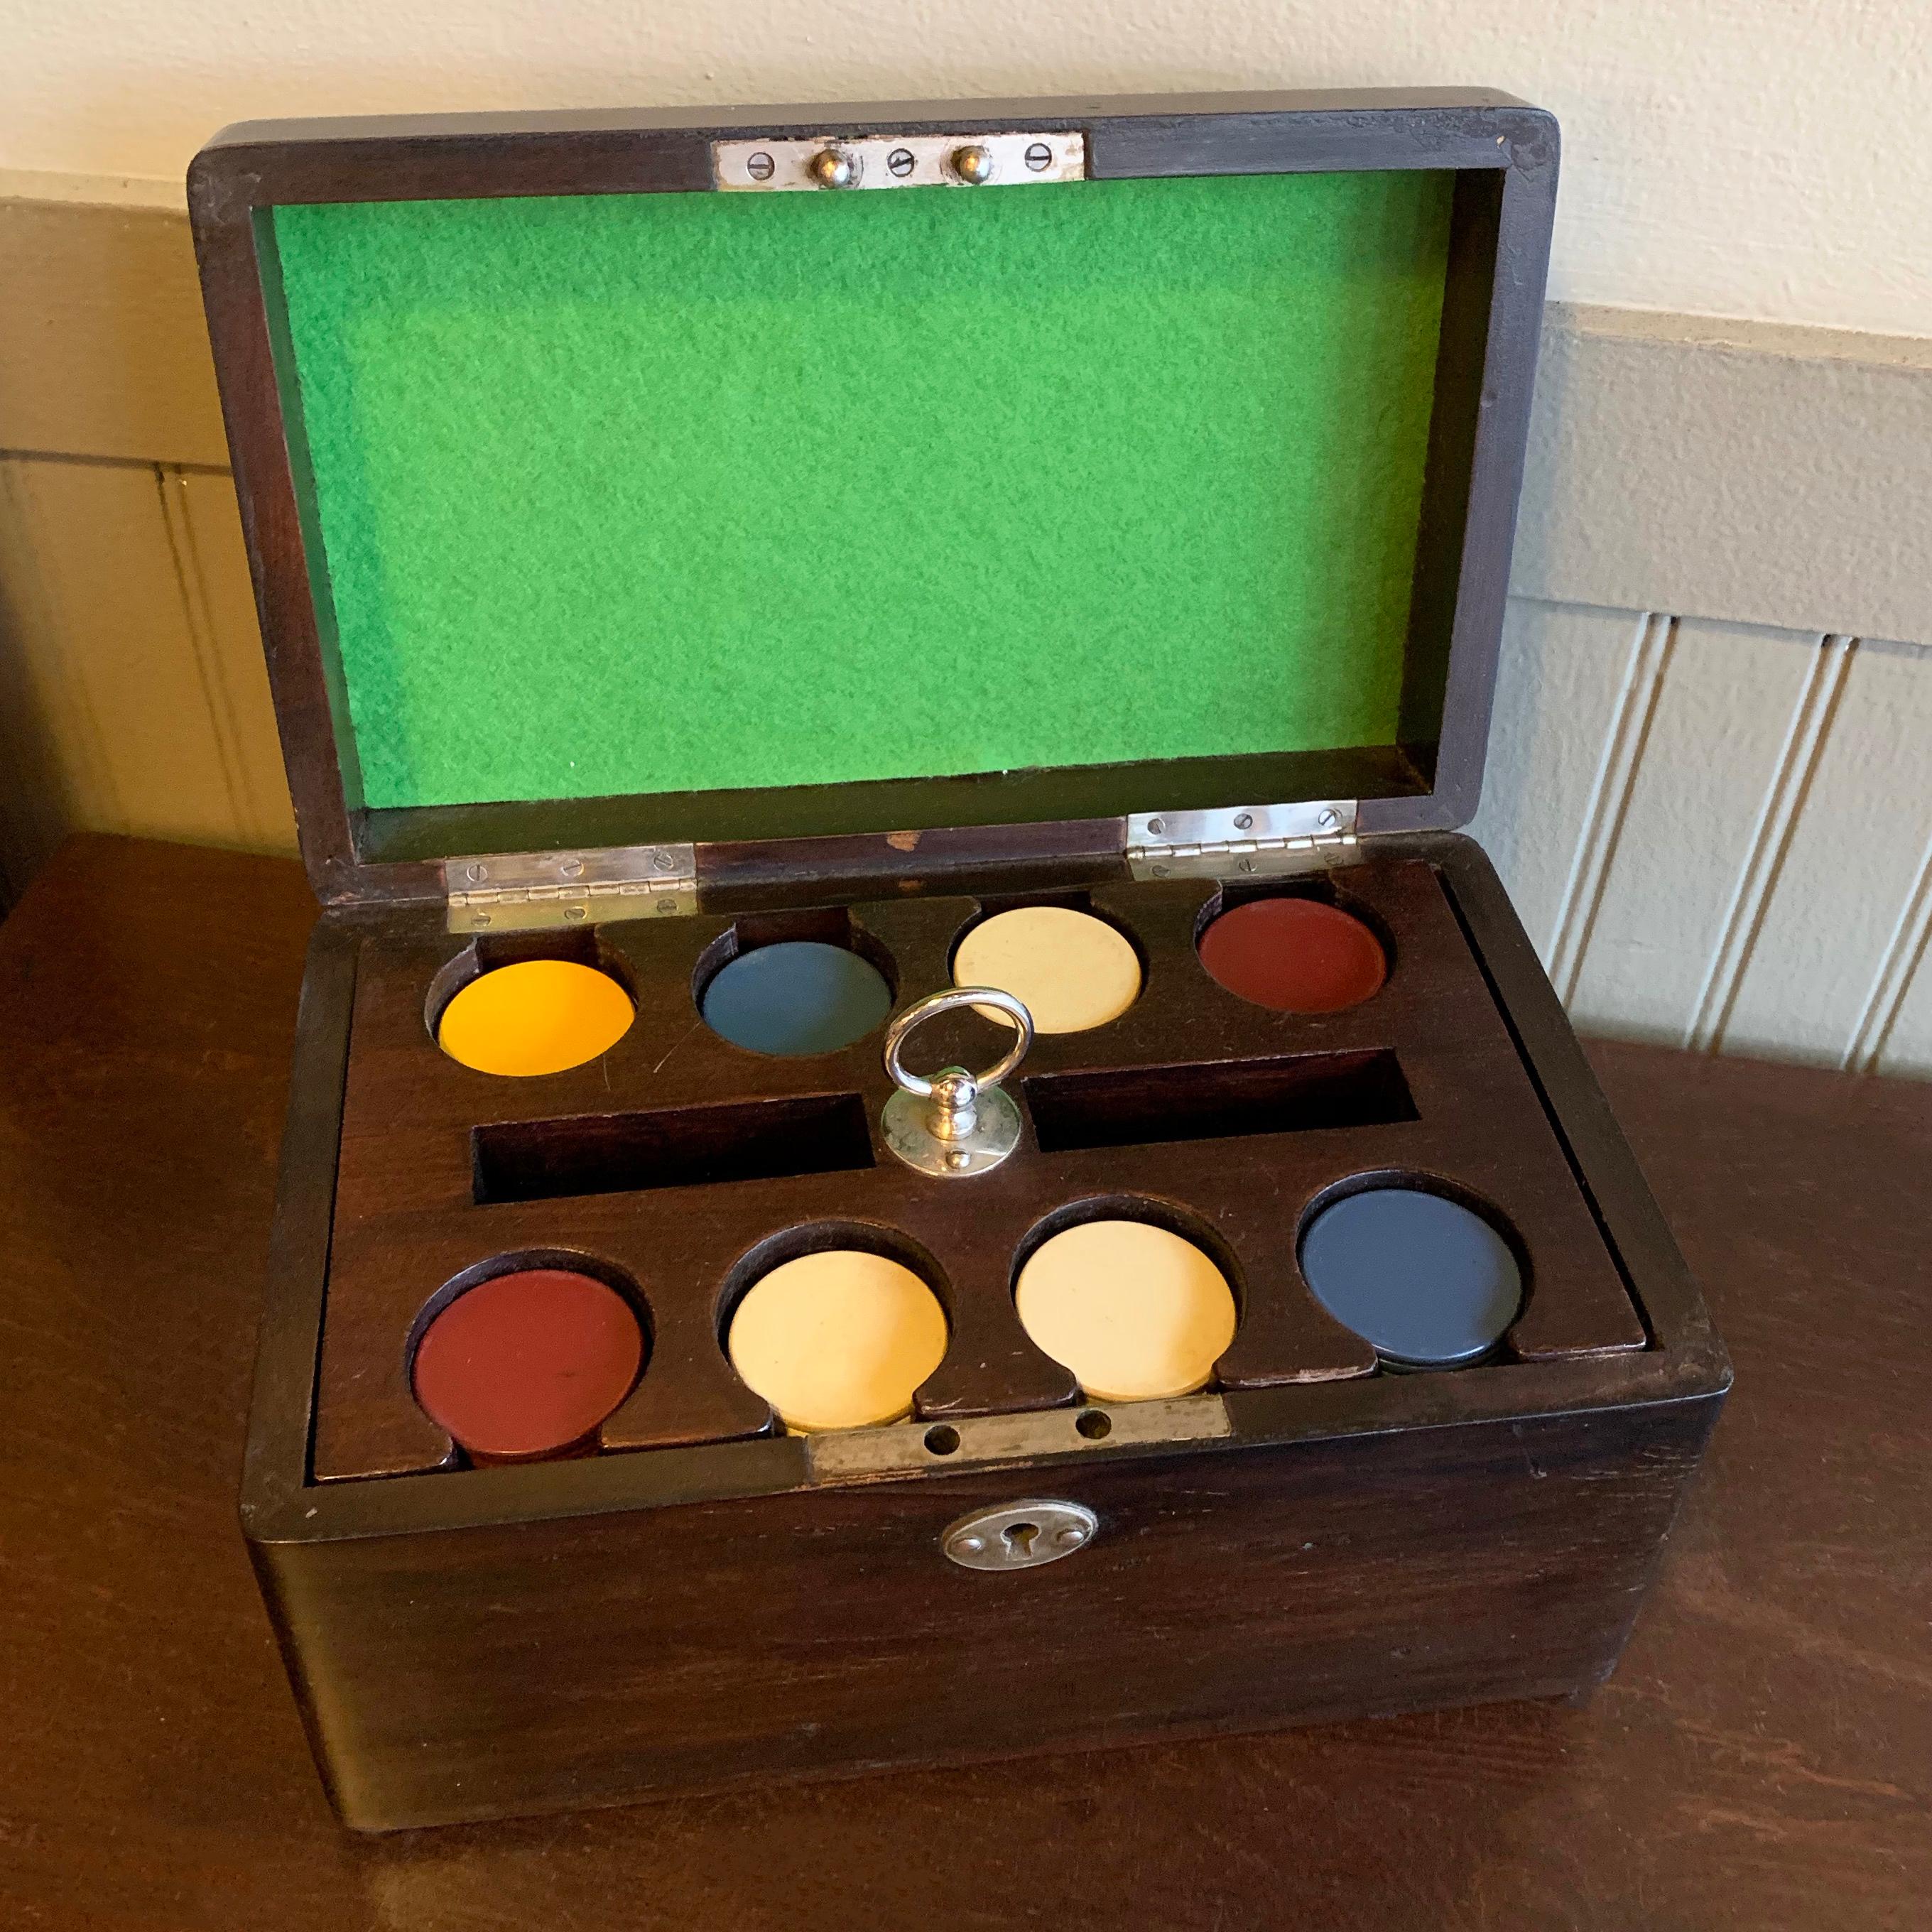 Art Deco, poker chip set features a mahogany box with pullout / pull-out chip caddy and melamine poker chips.